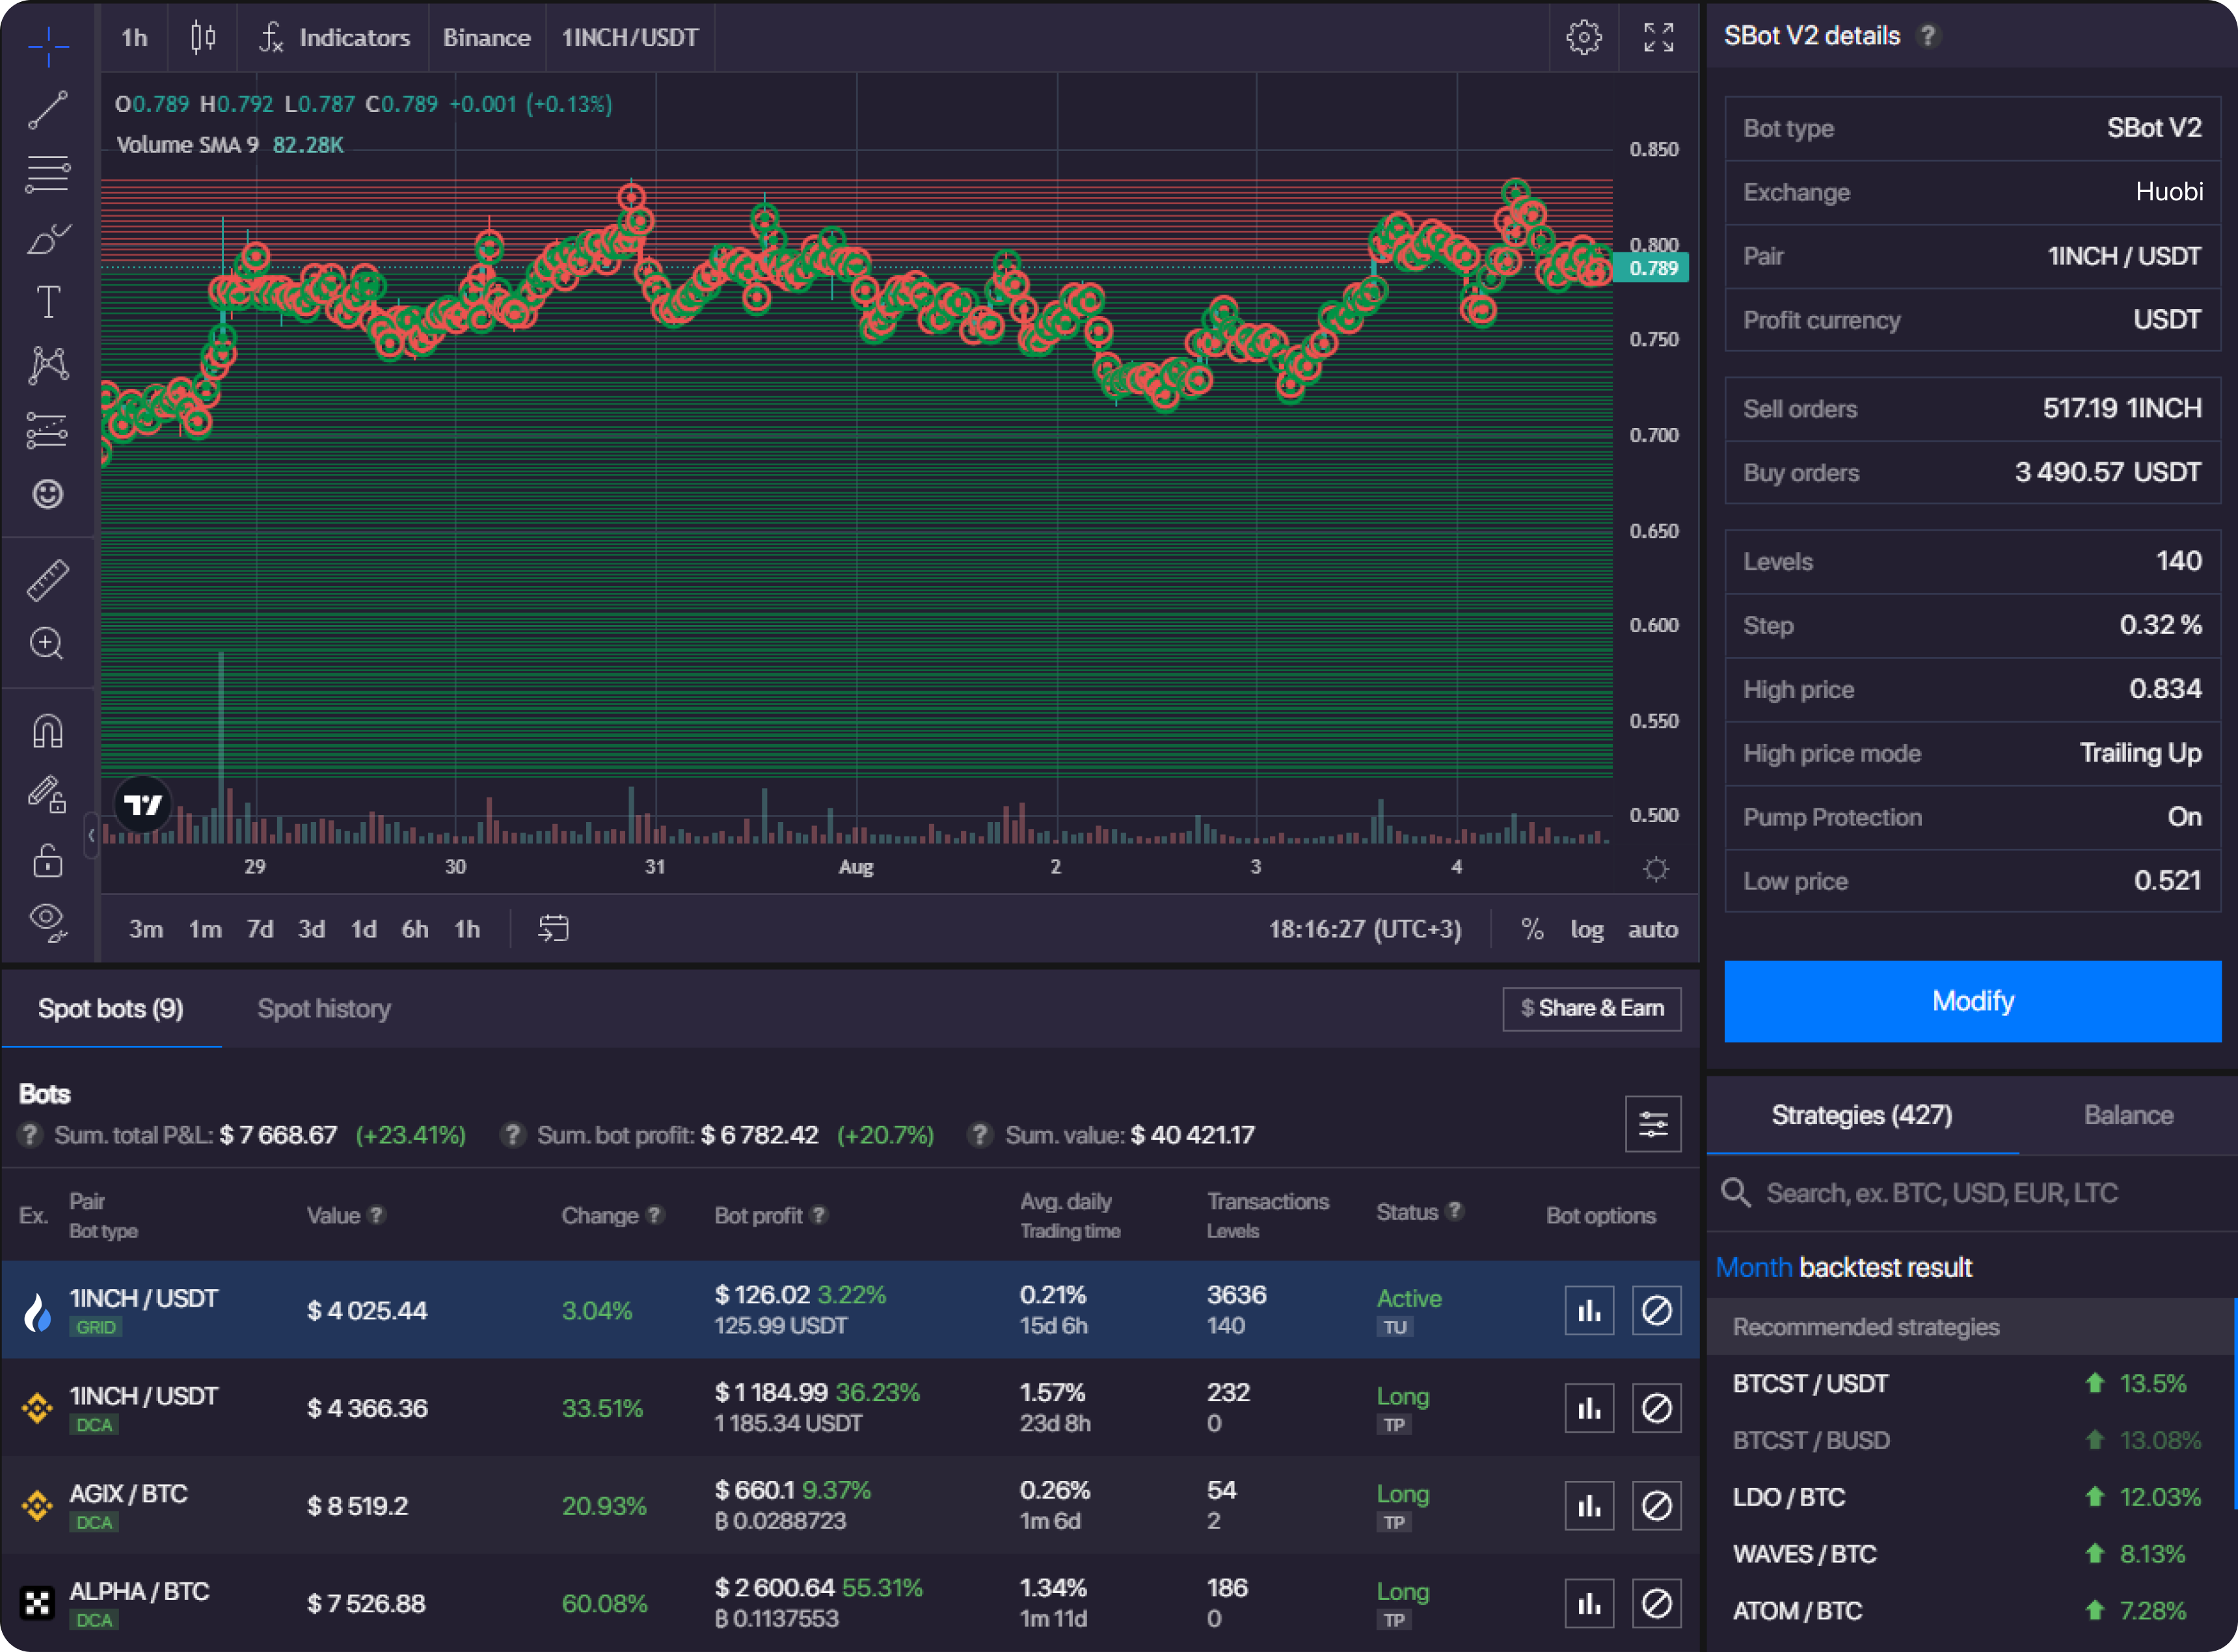 Huobi trading interface overview